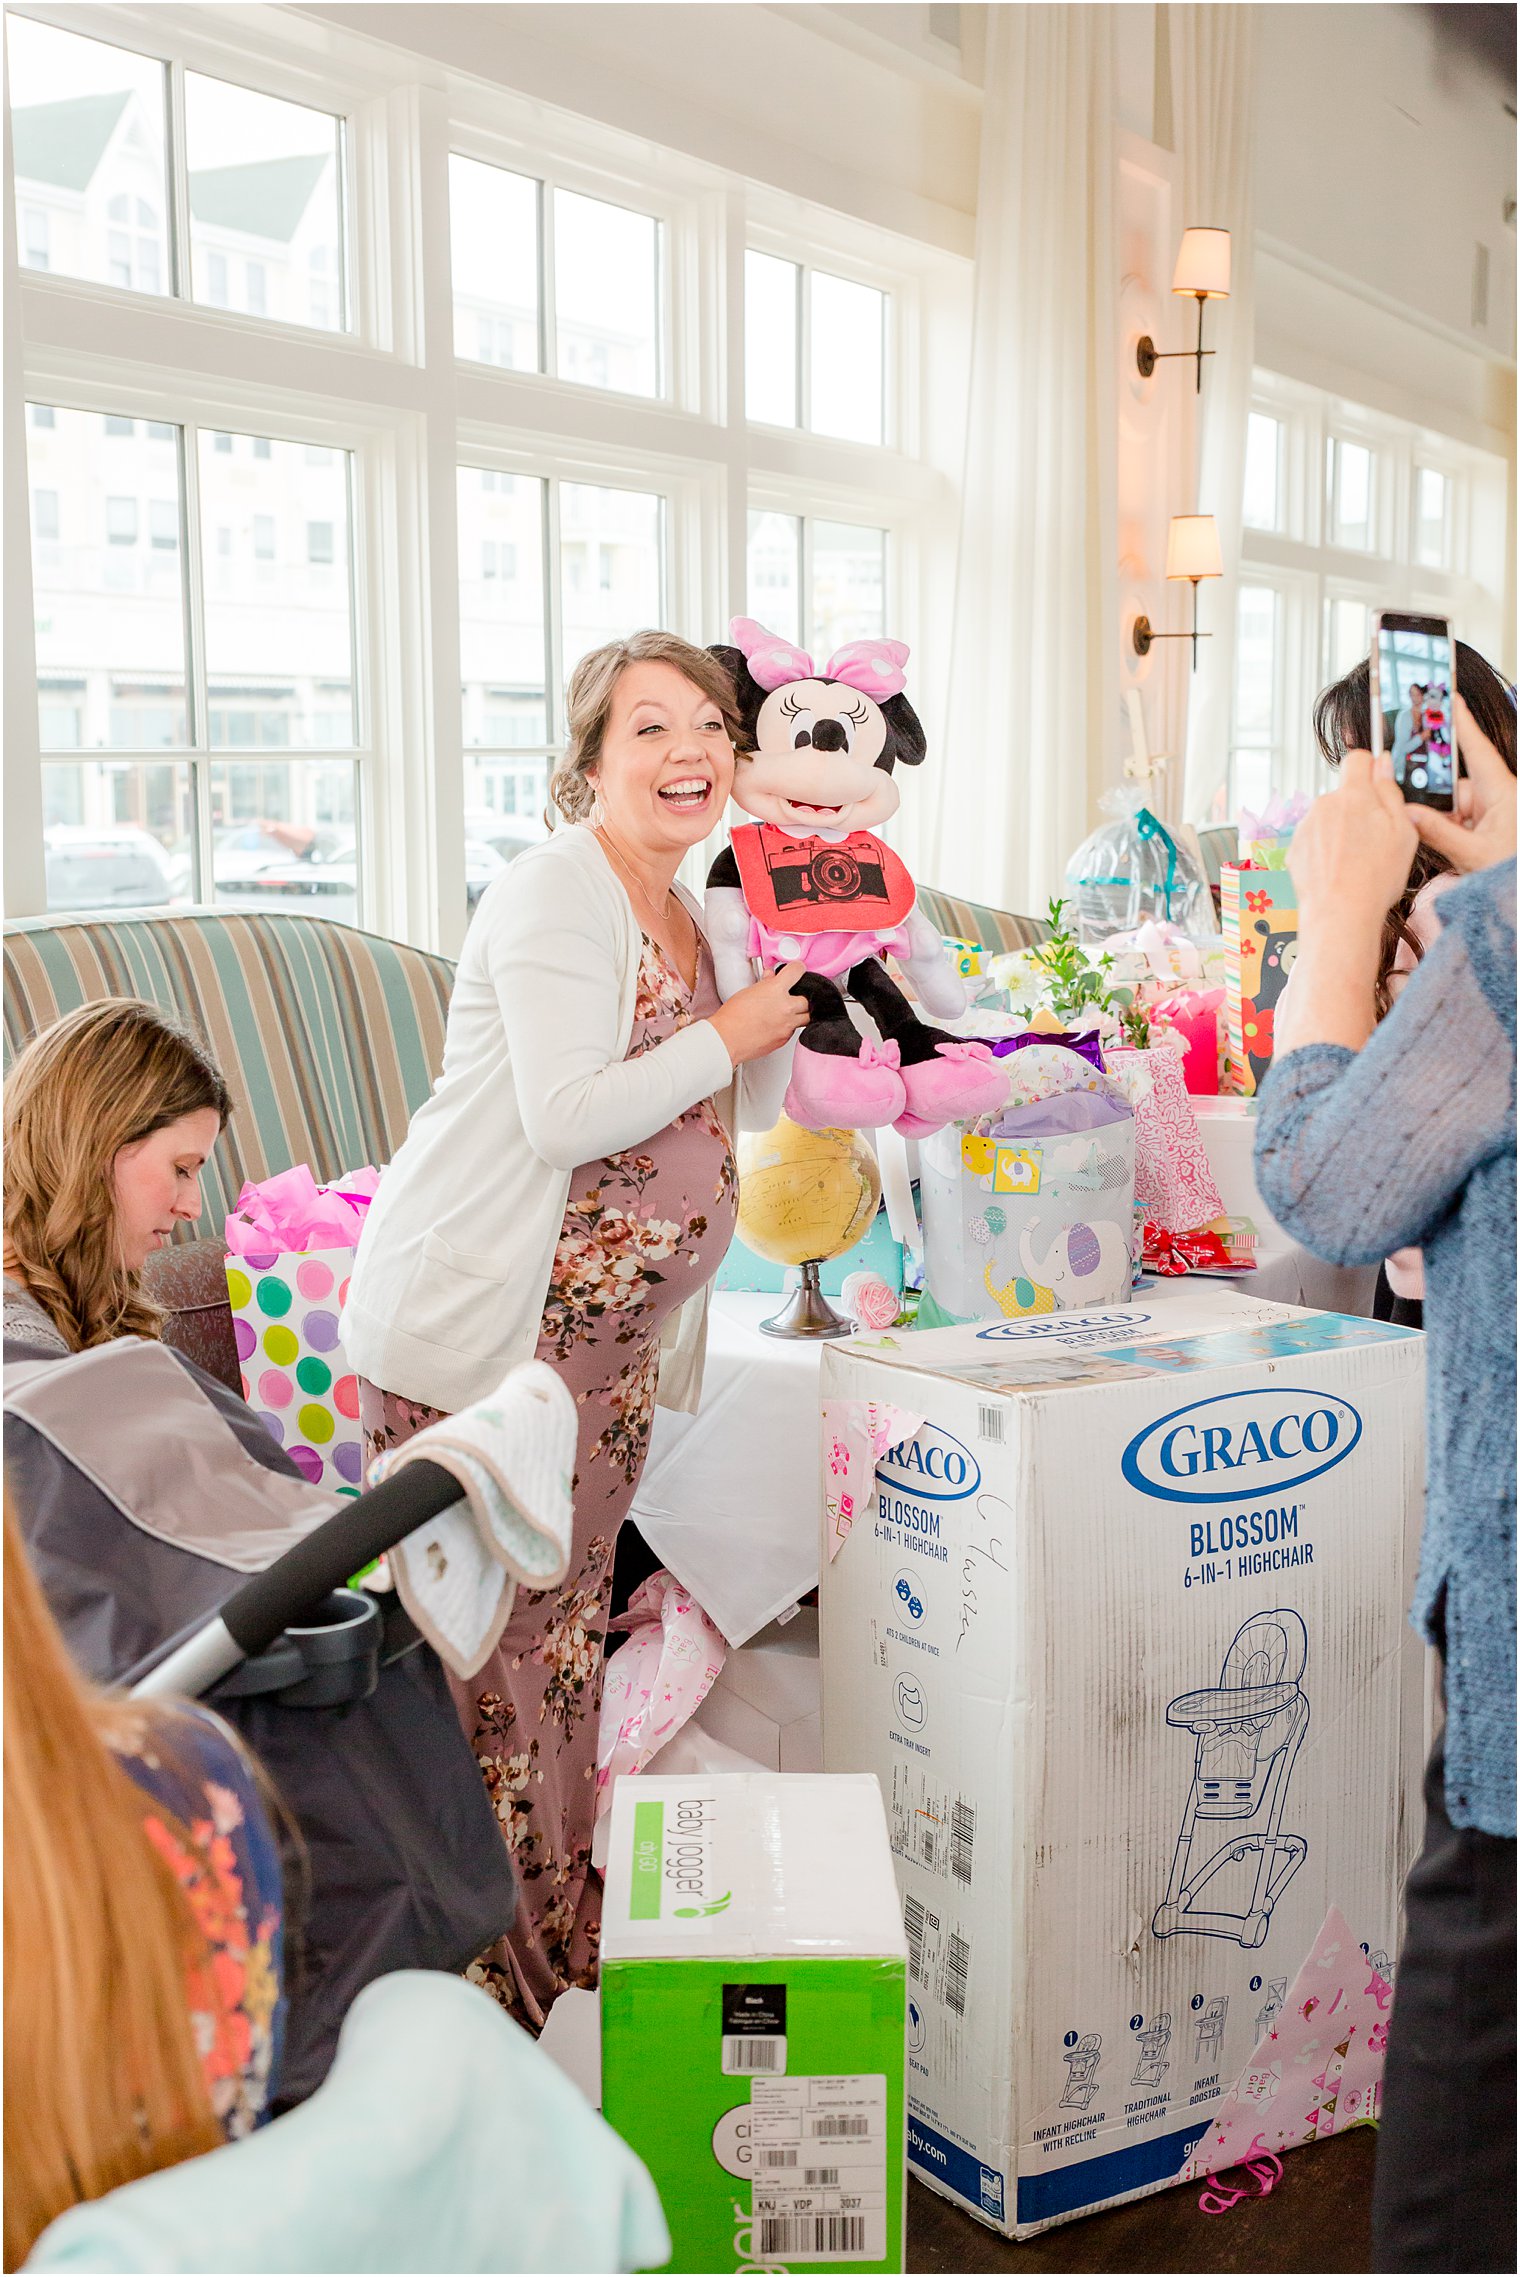 candid photo at baby shower